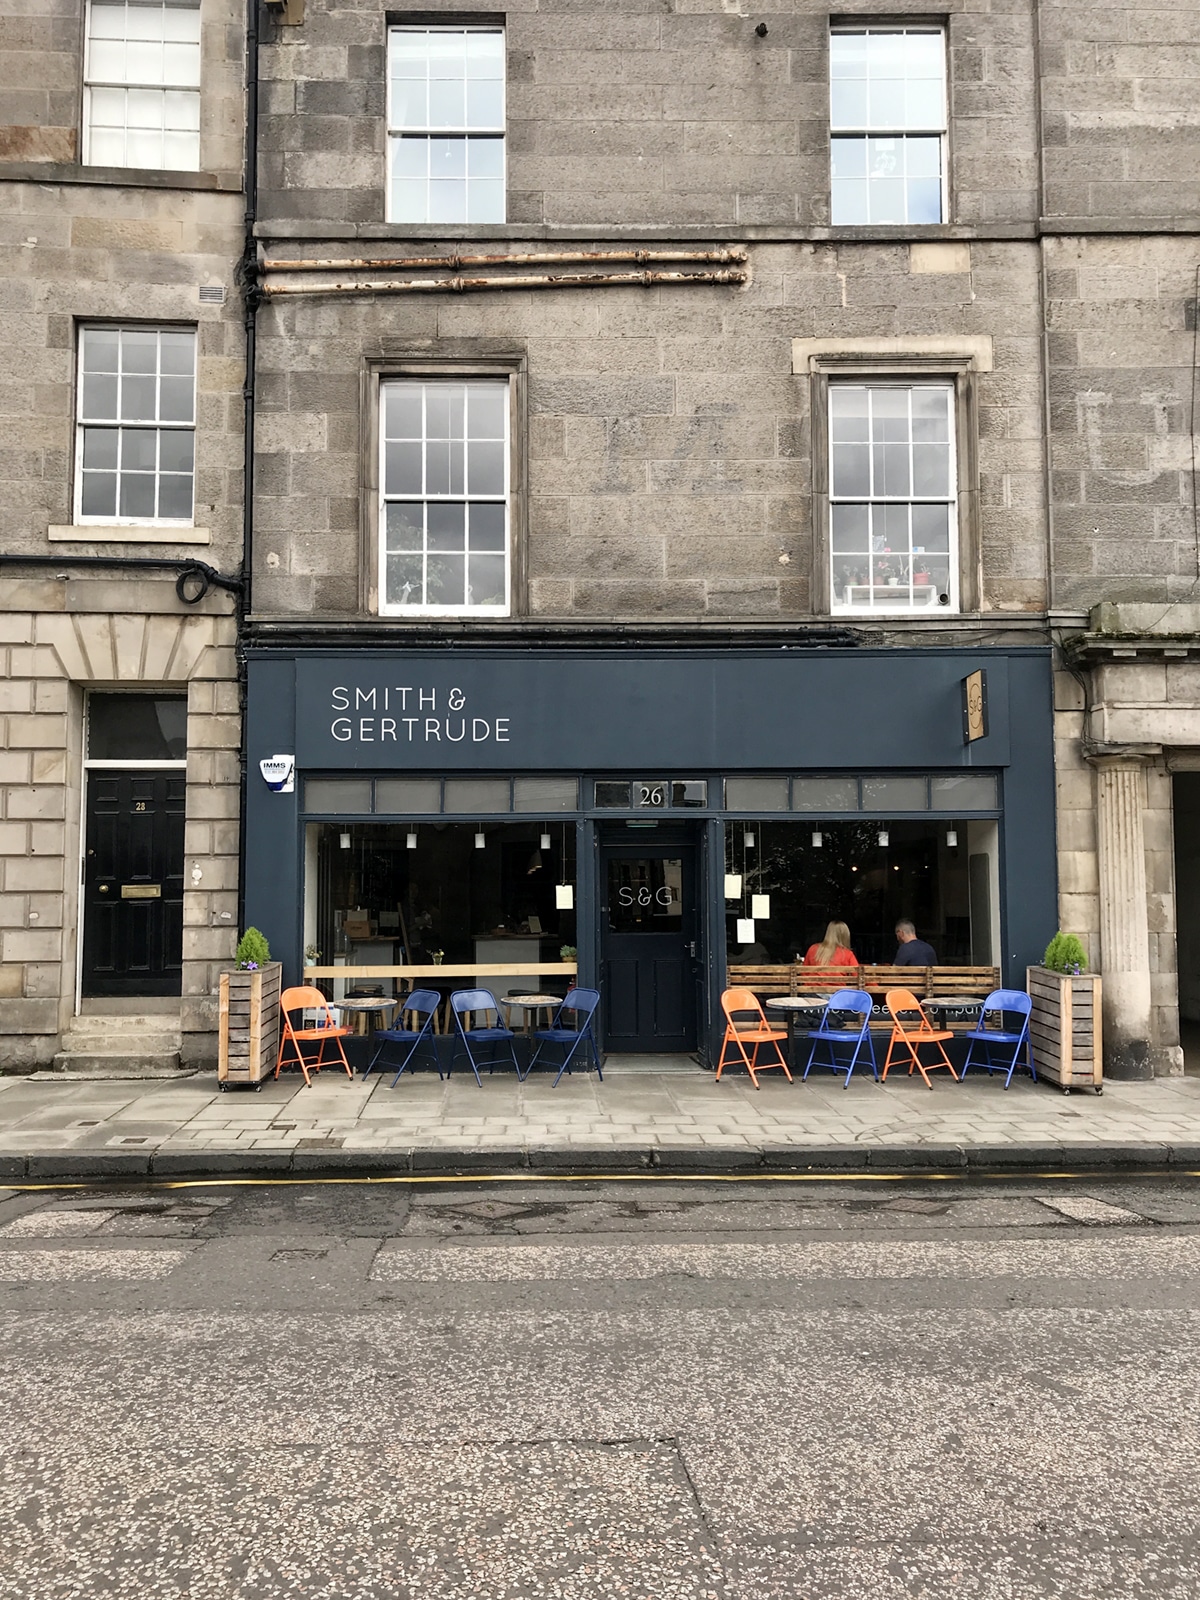 smith and gertrude in edinburgh is perfect for a midday snack and wine | edinburgh travel guide on coco kelley